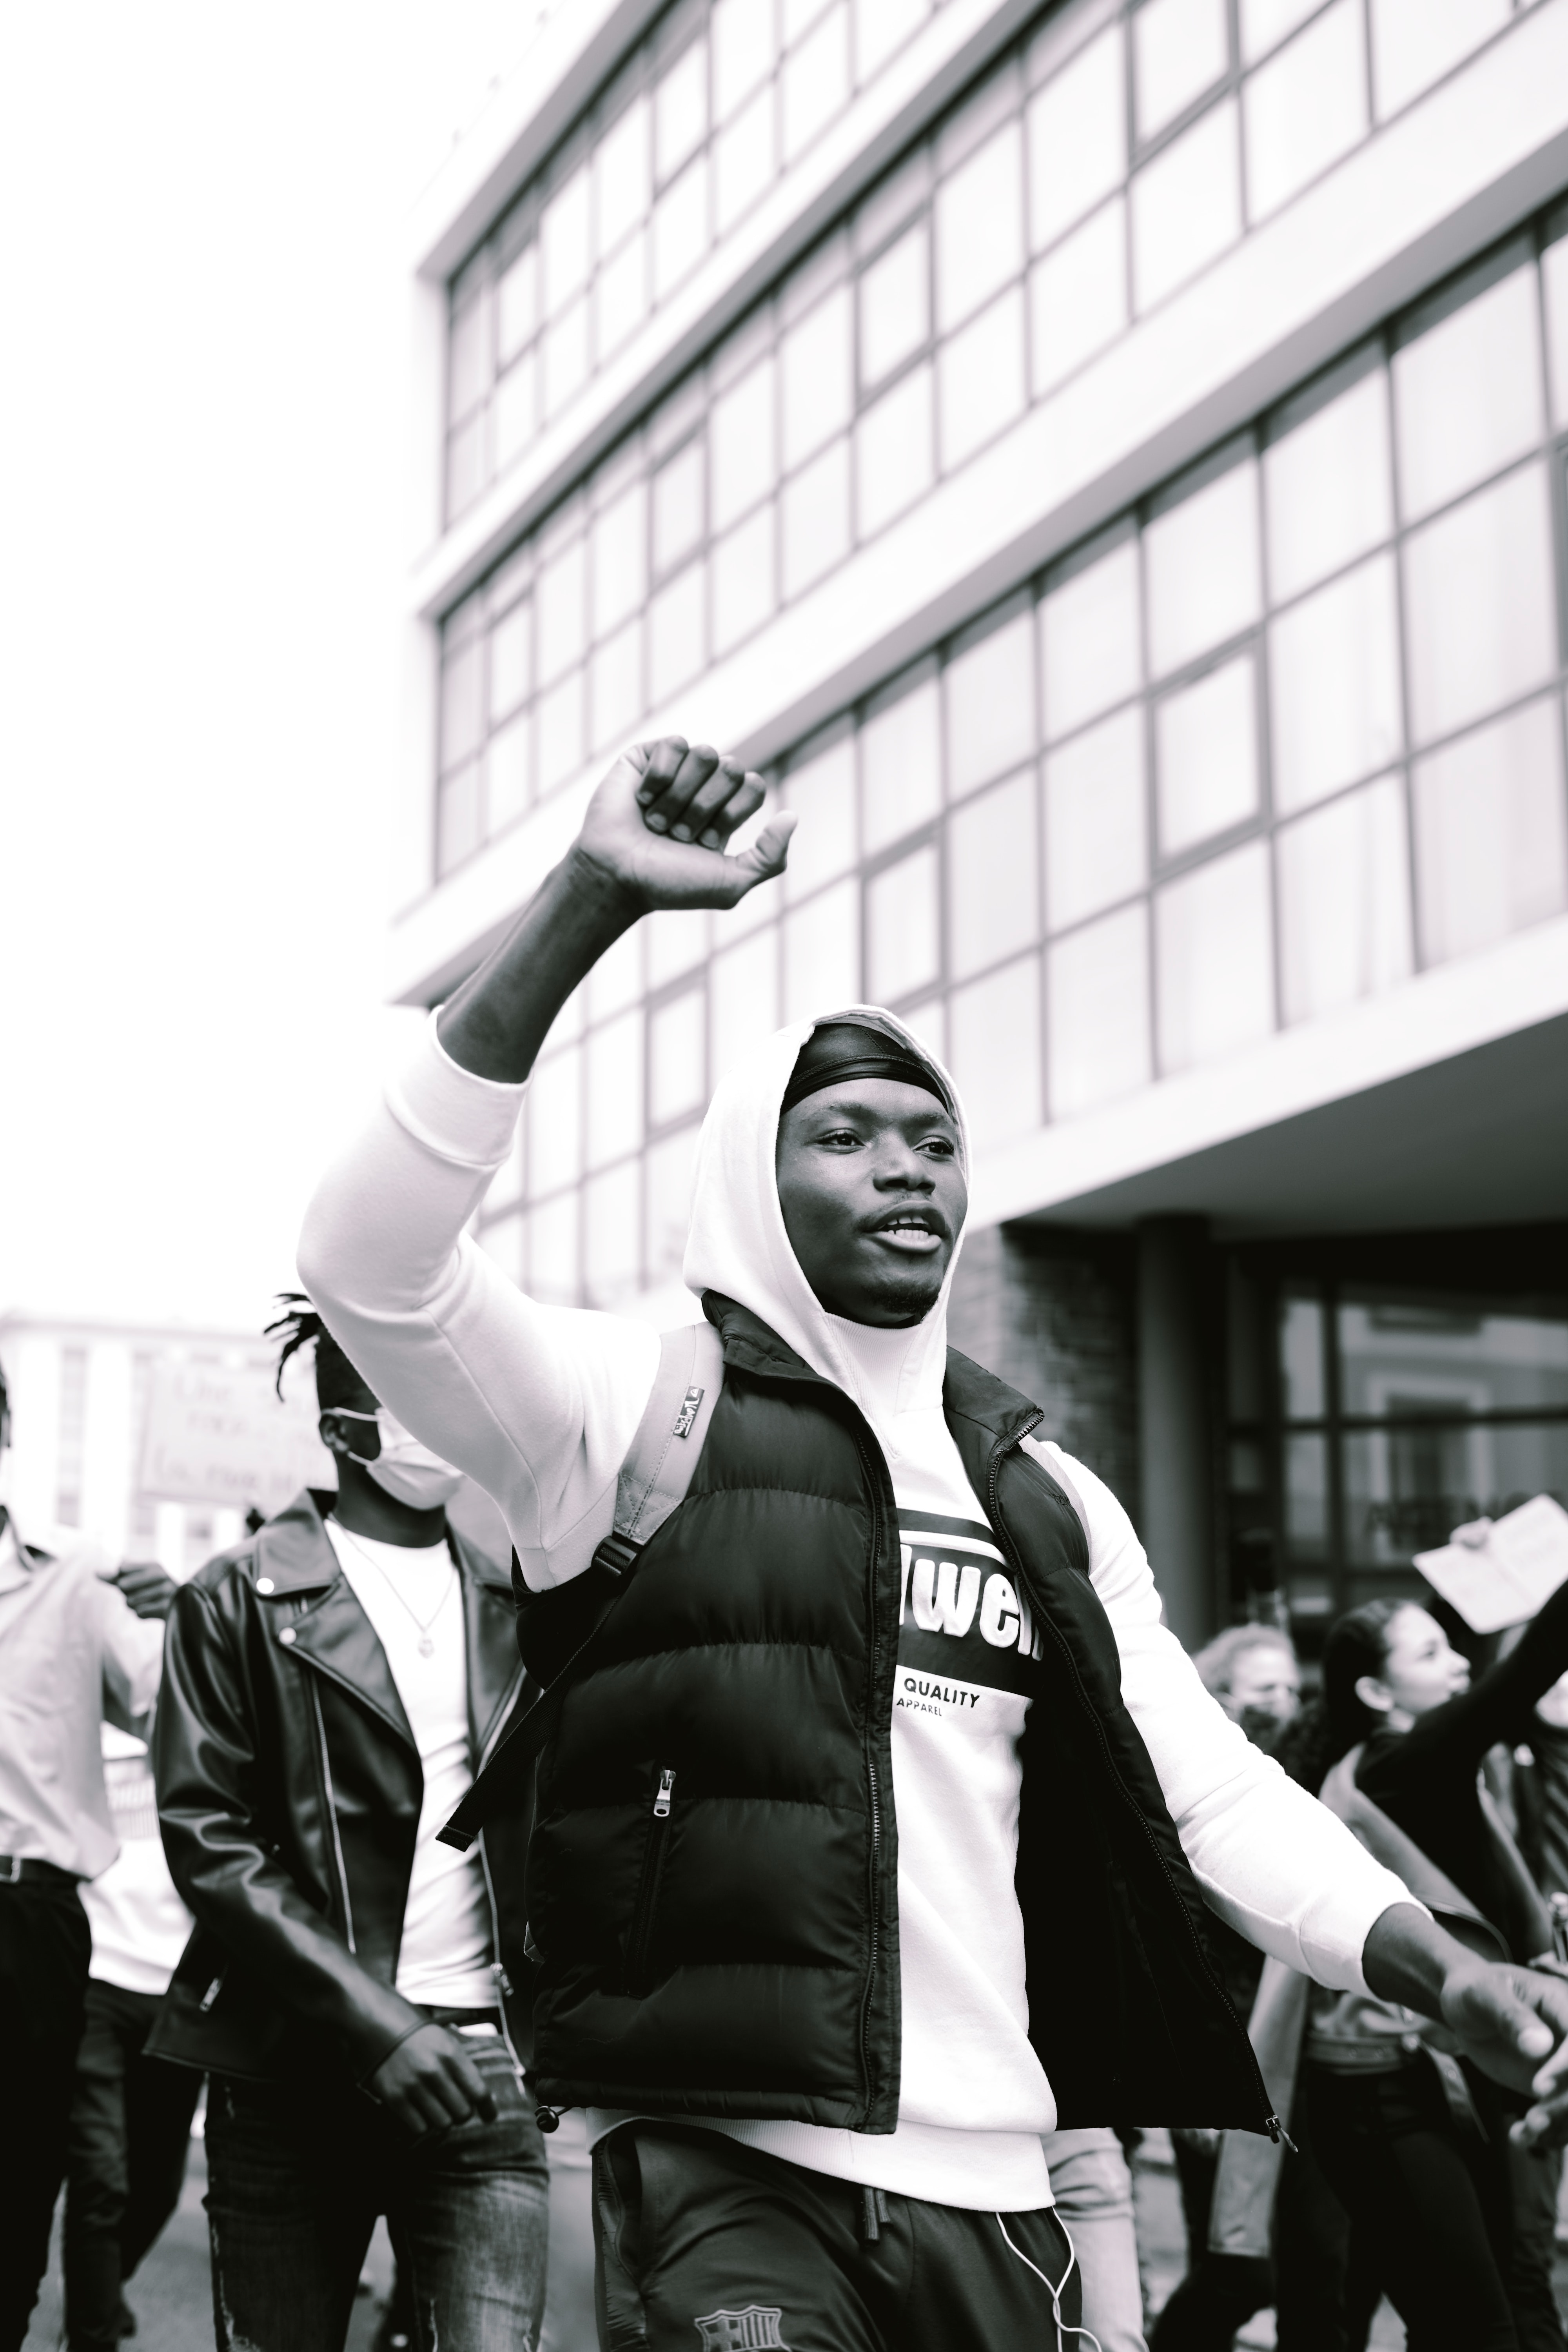 Black person walking in the street with a raised fist